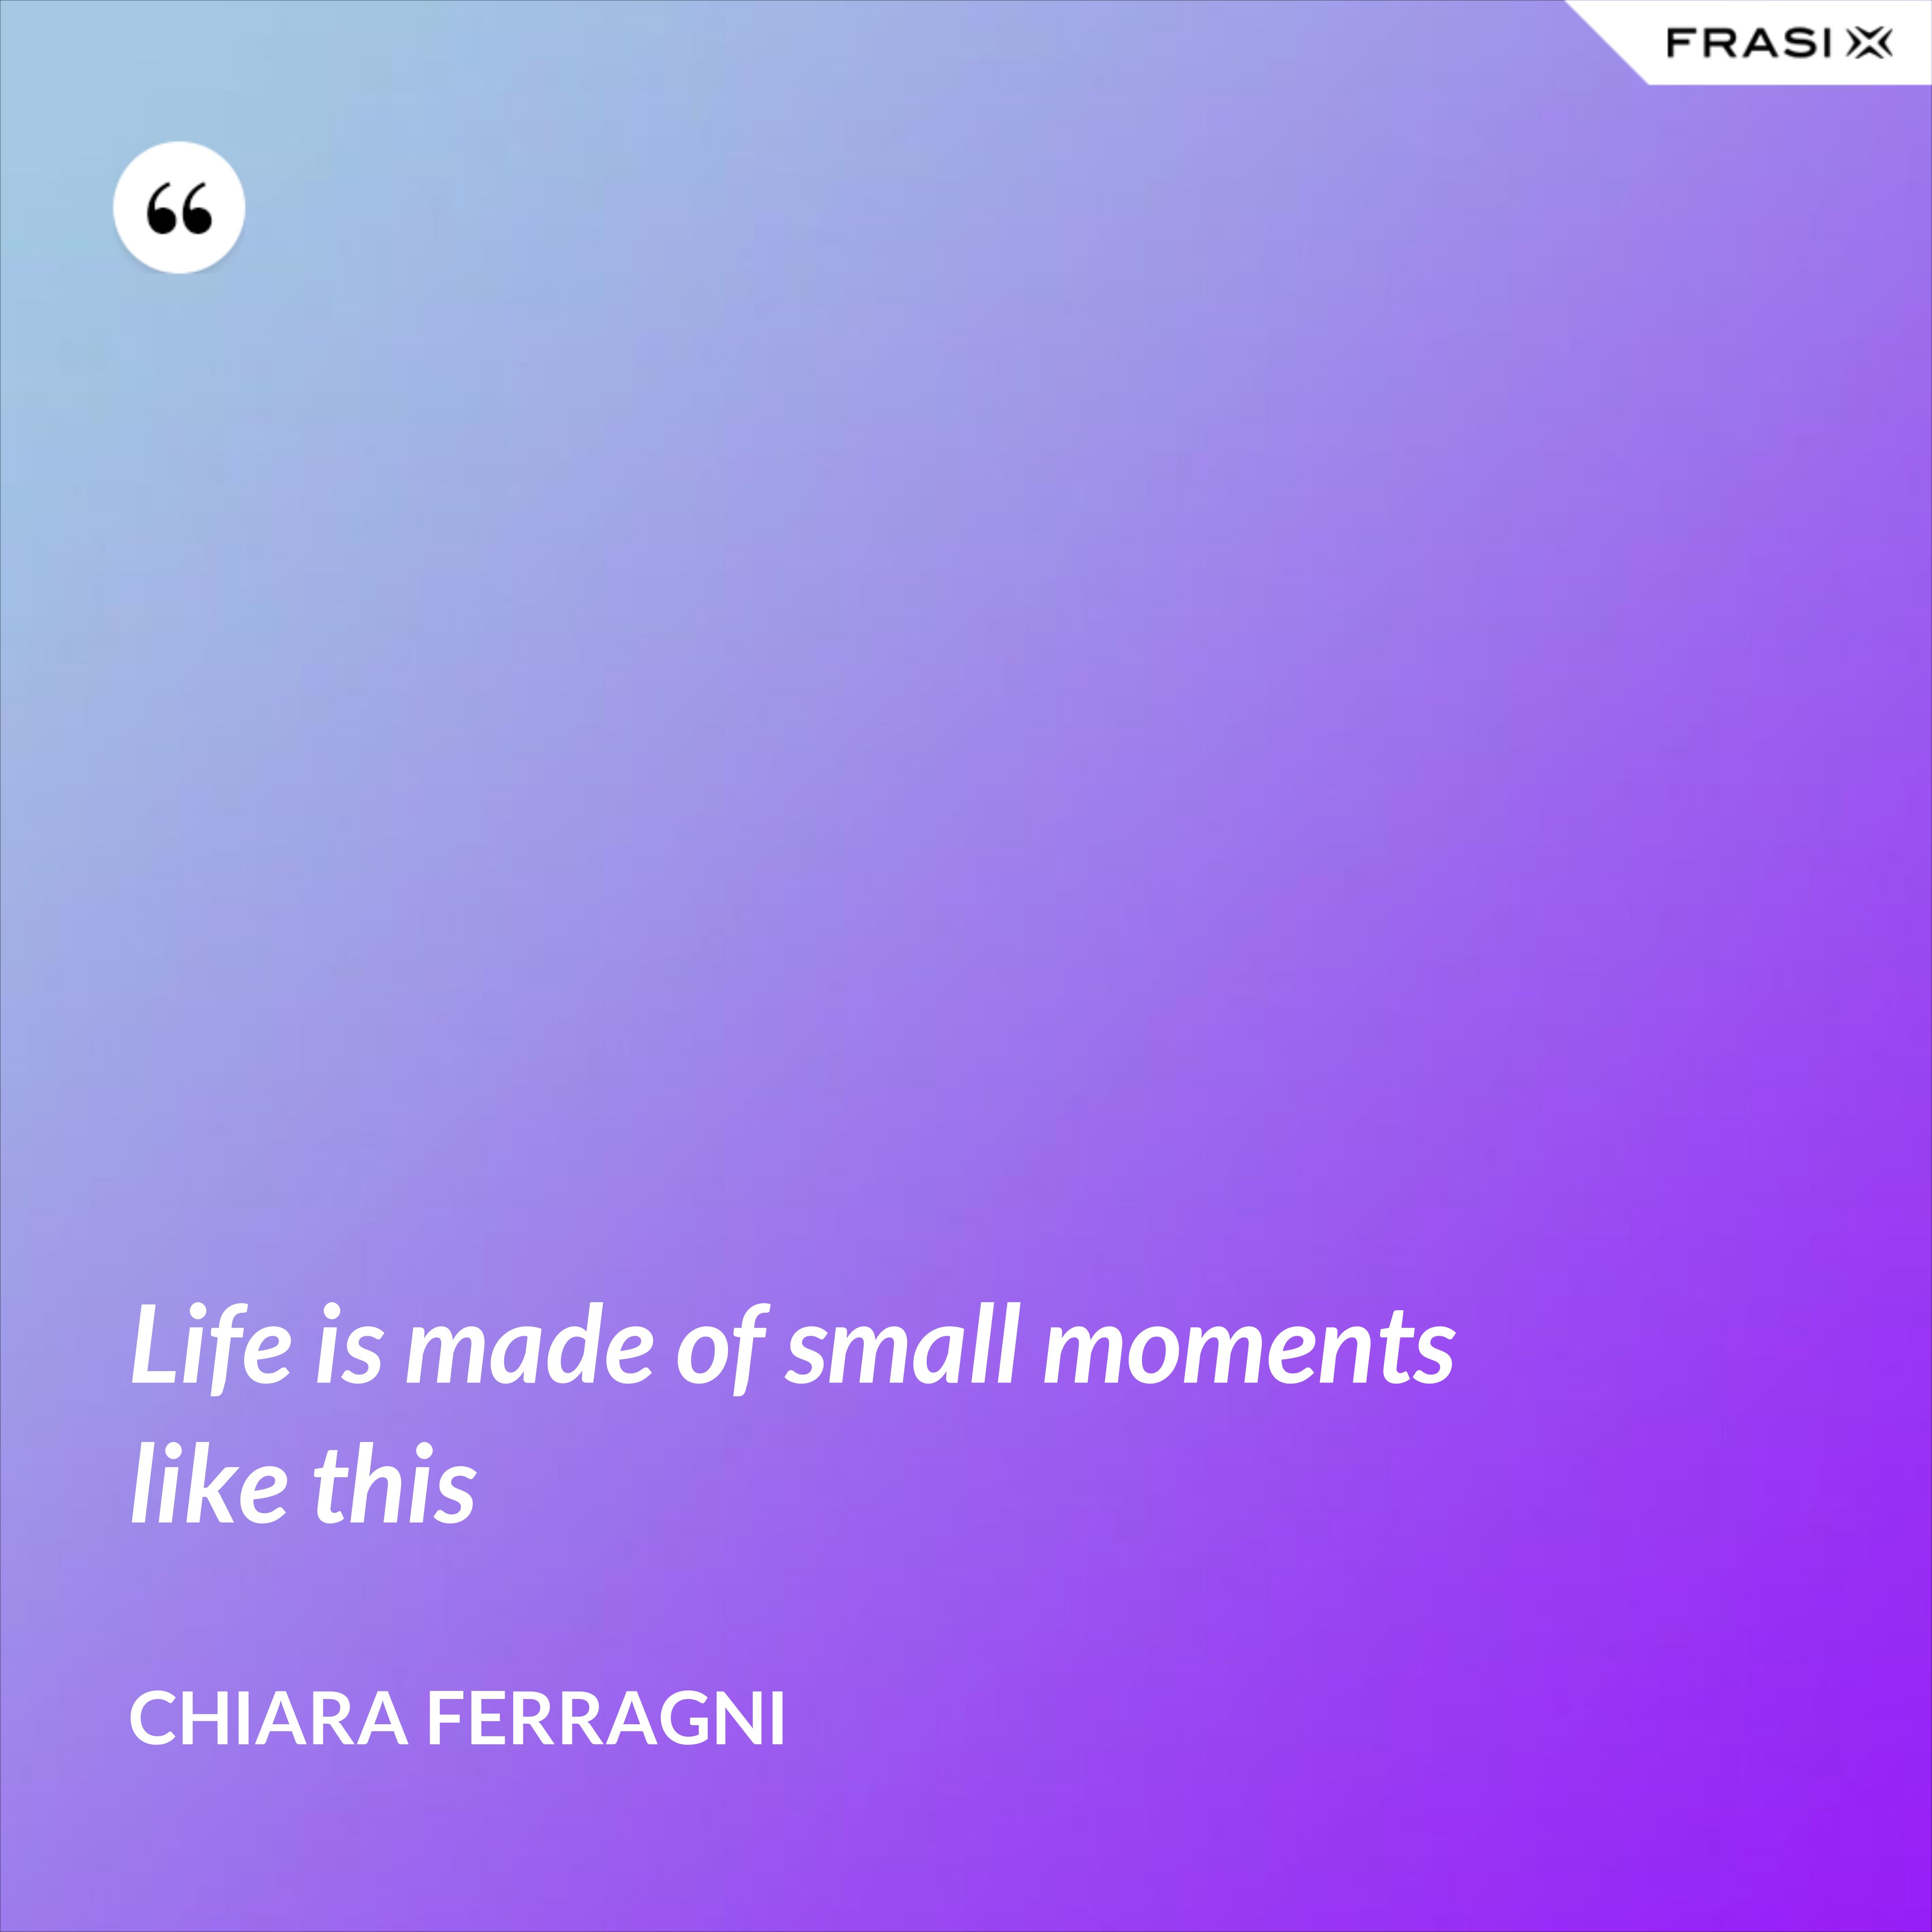 Life is made of small moments like this - Chiara Ferragni